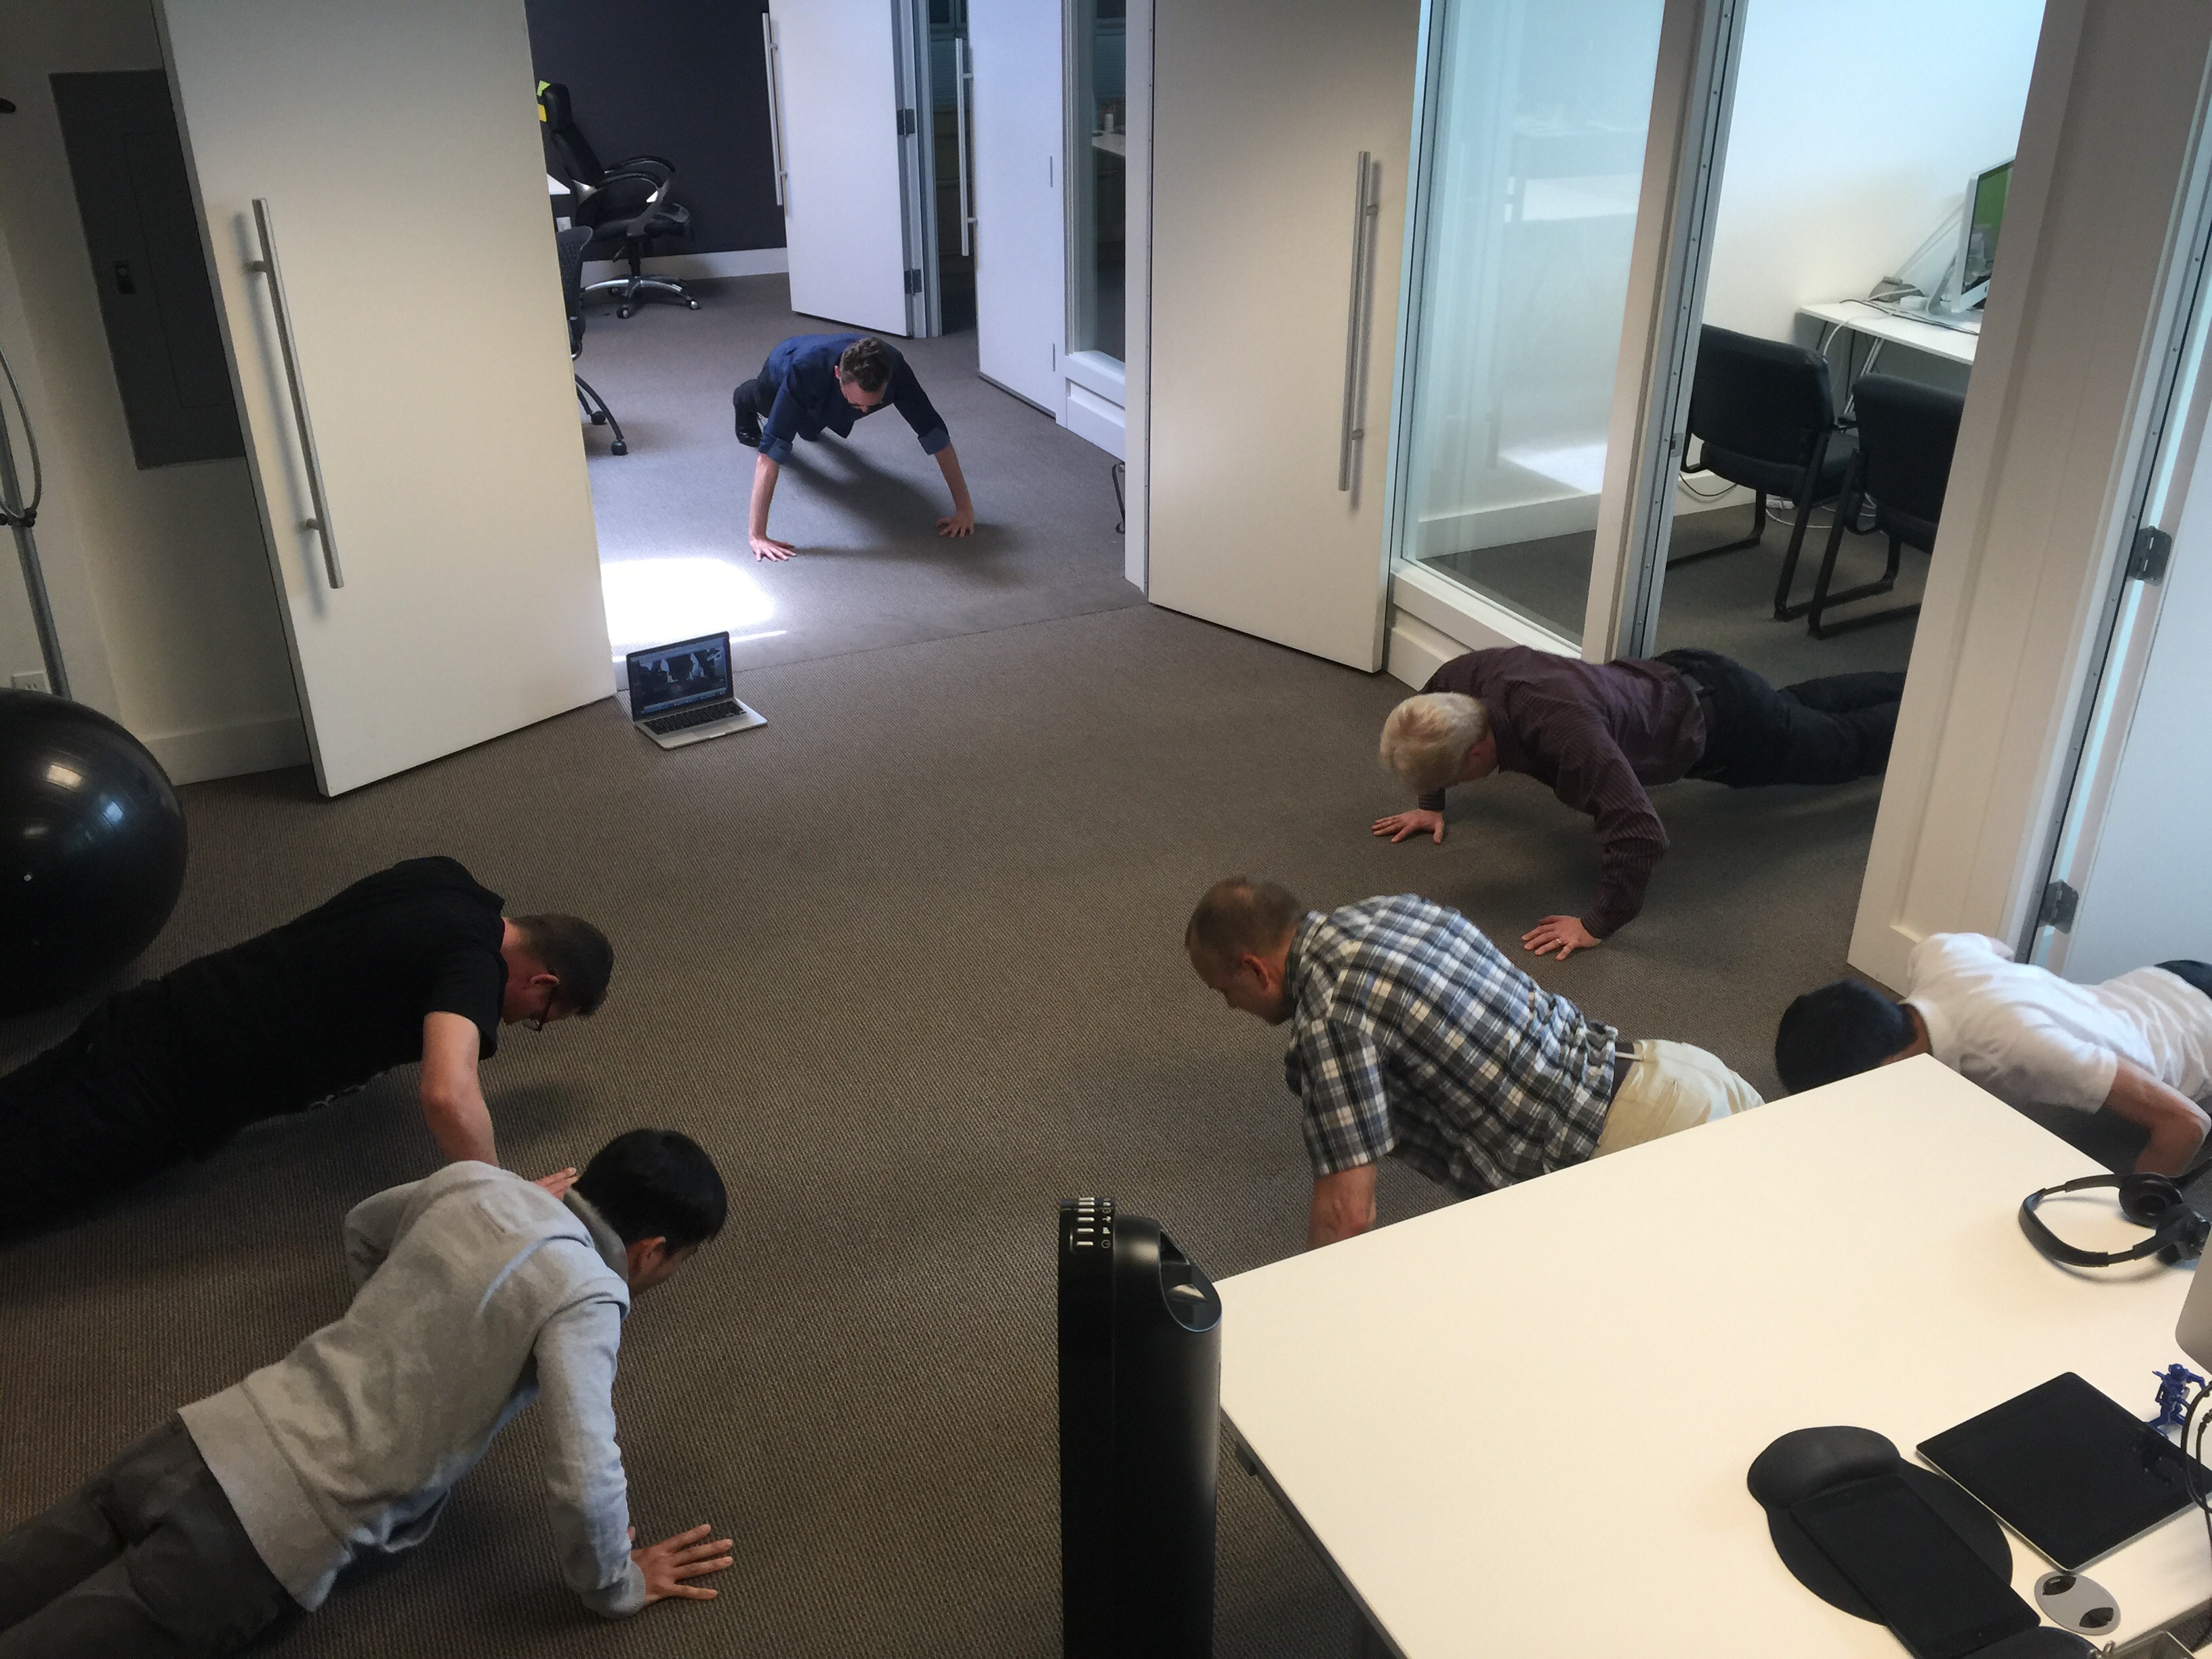 A remotee joining our weekly #toughcoders push-up challenge by webcam, via Google Meet.